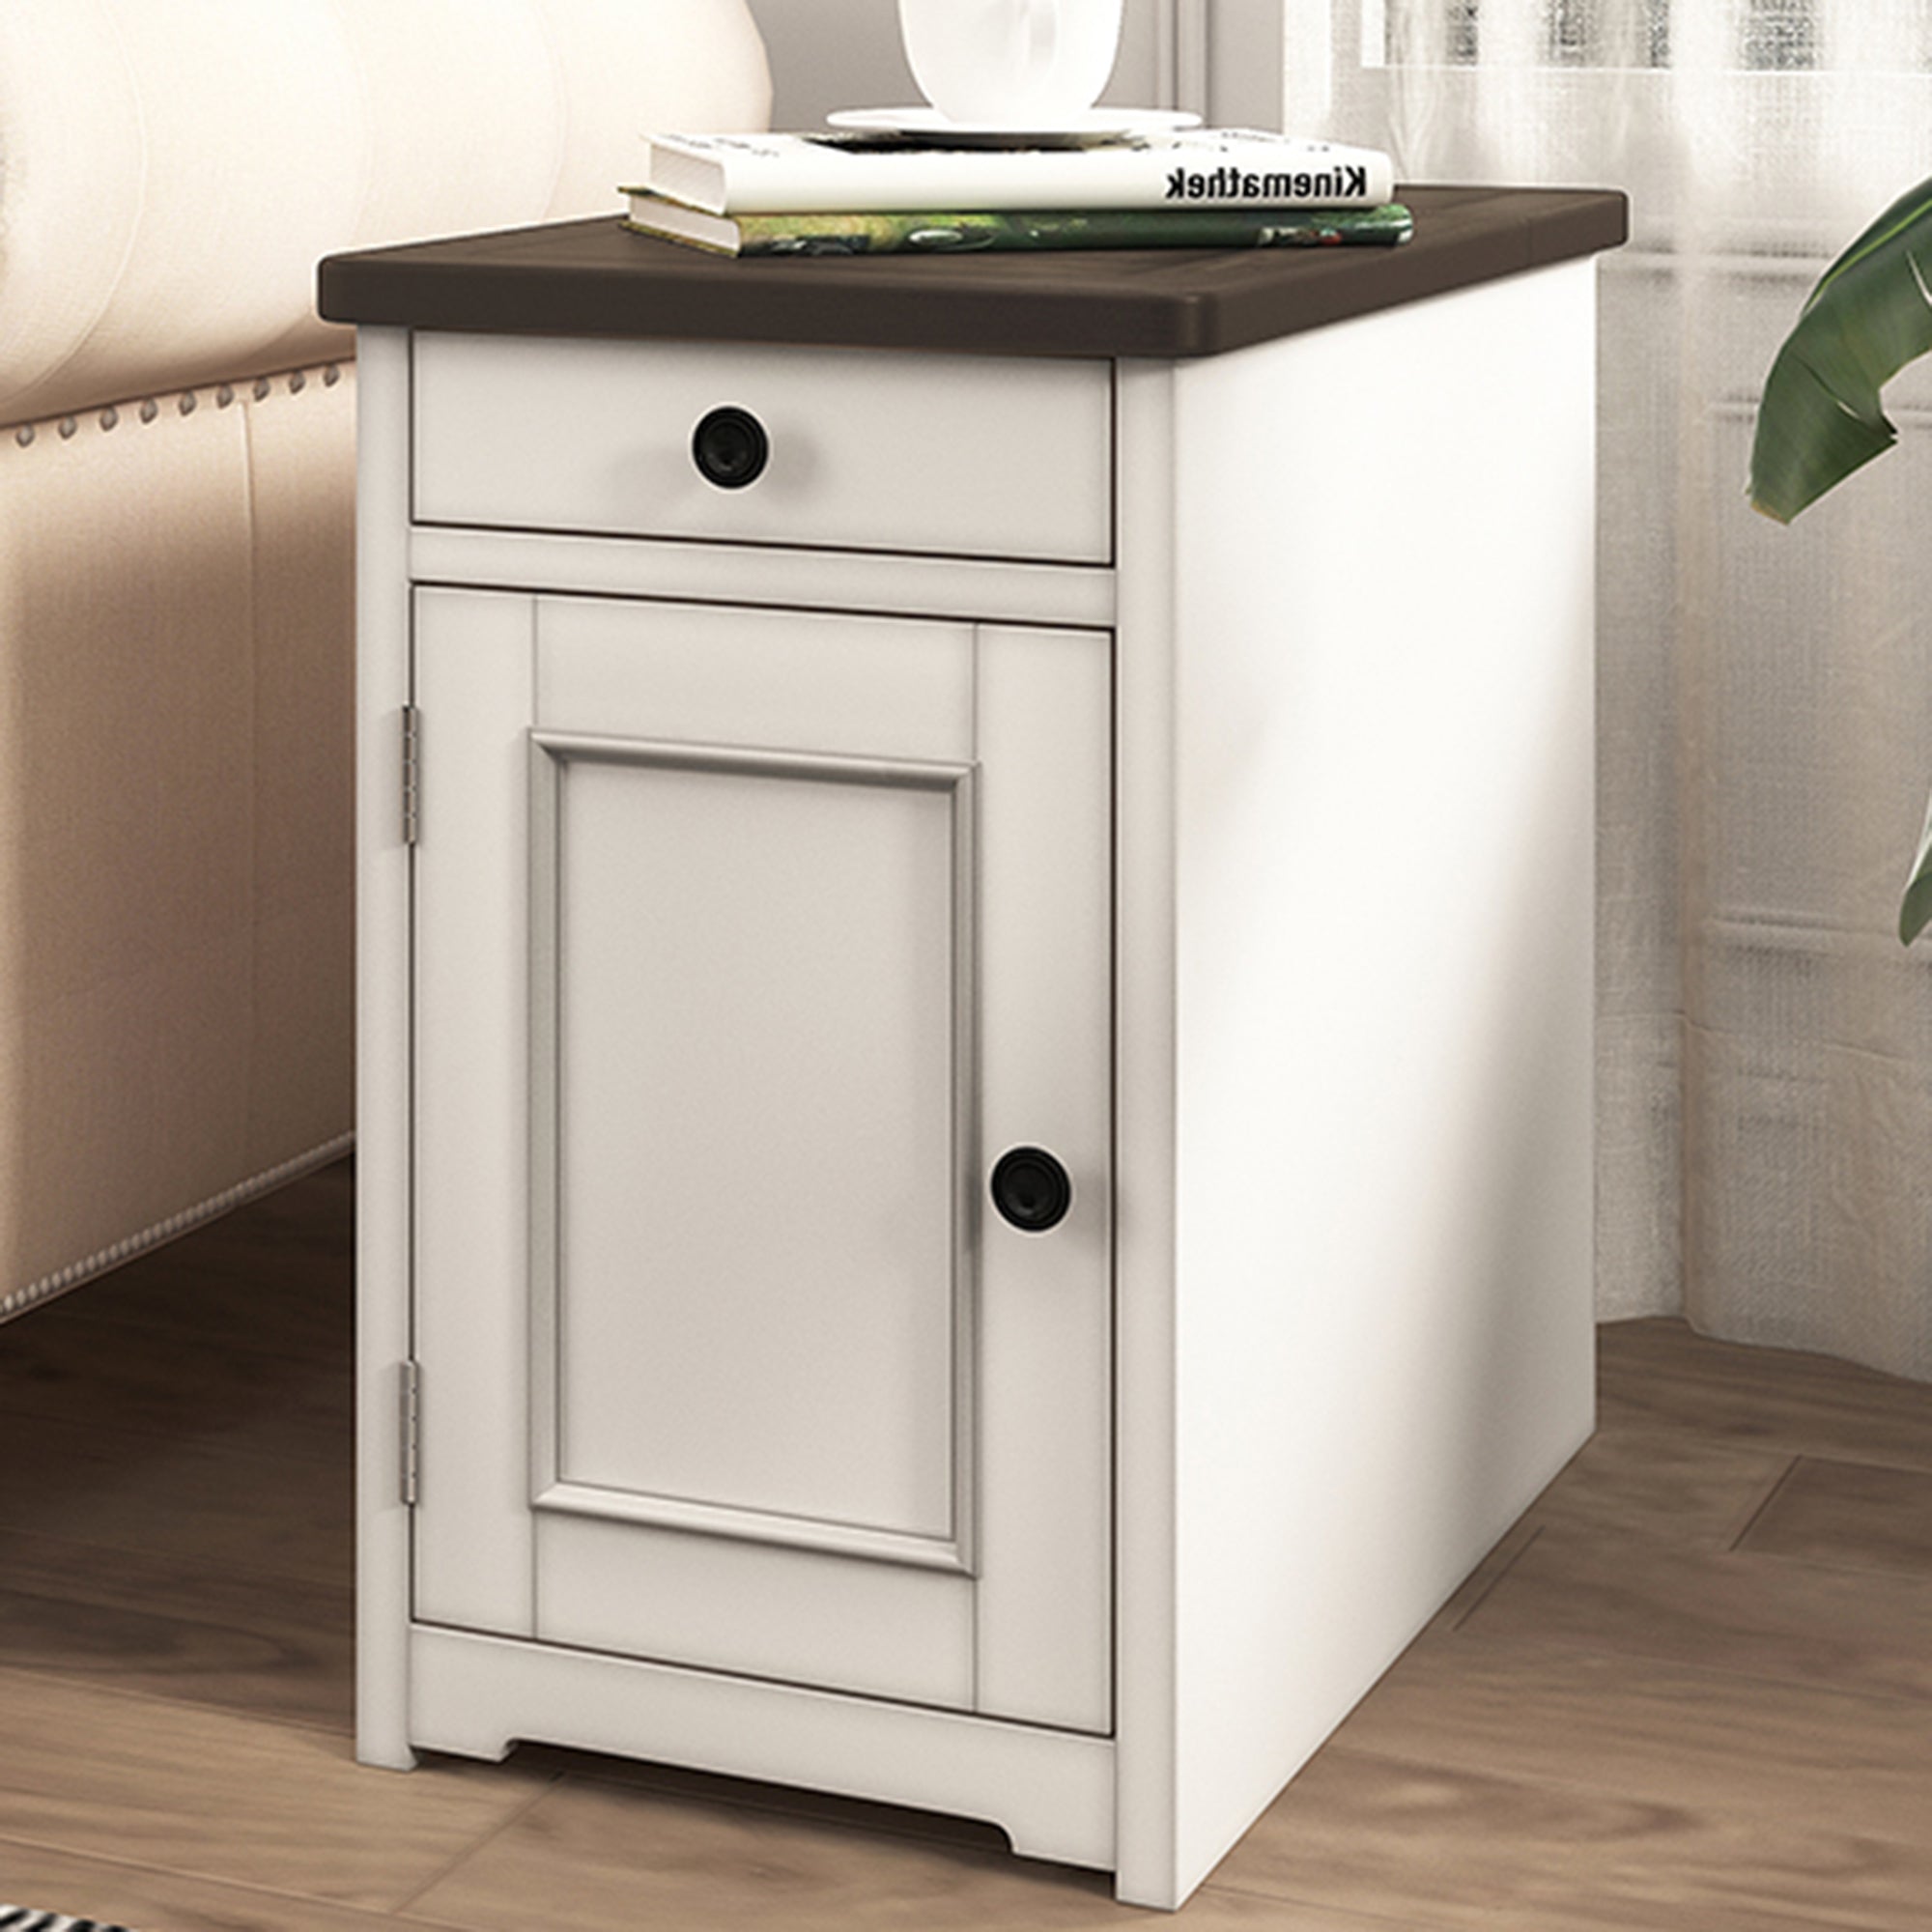 1-Drawer Solid Wood End Table with USB Ports